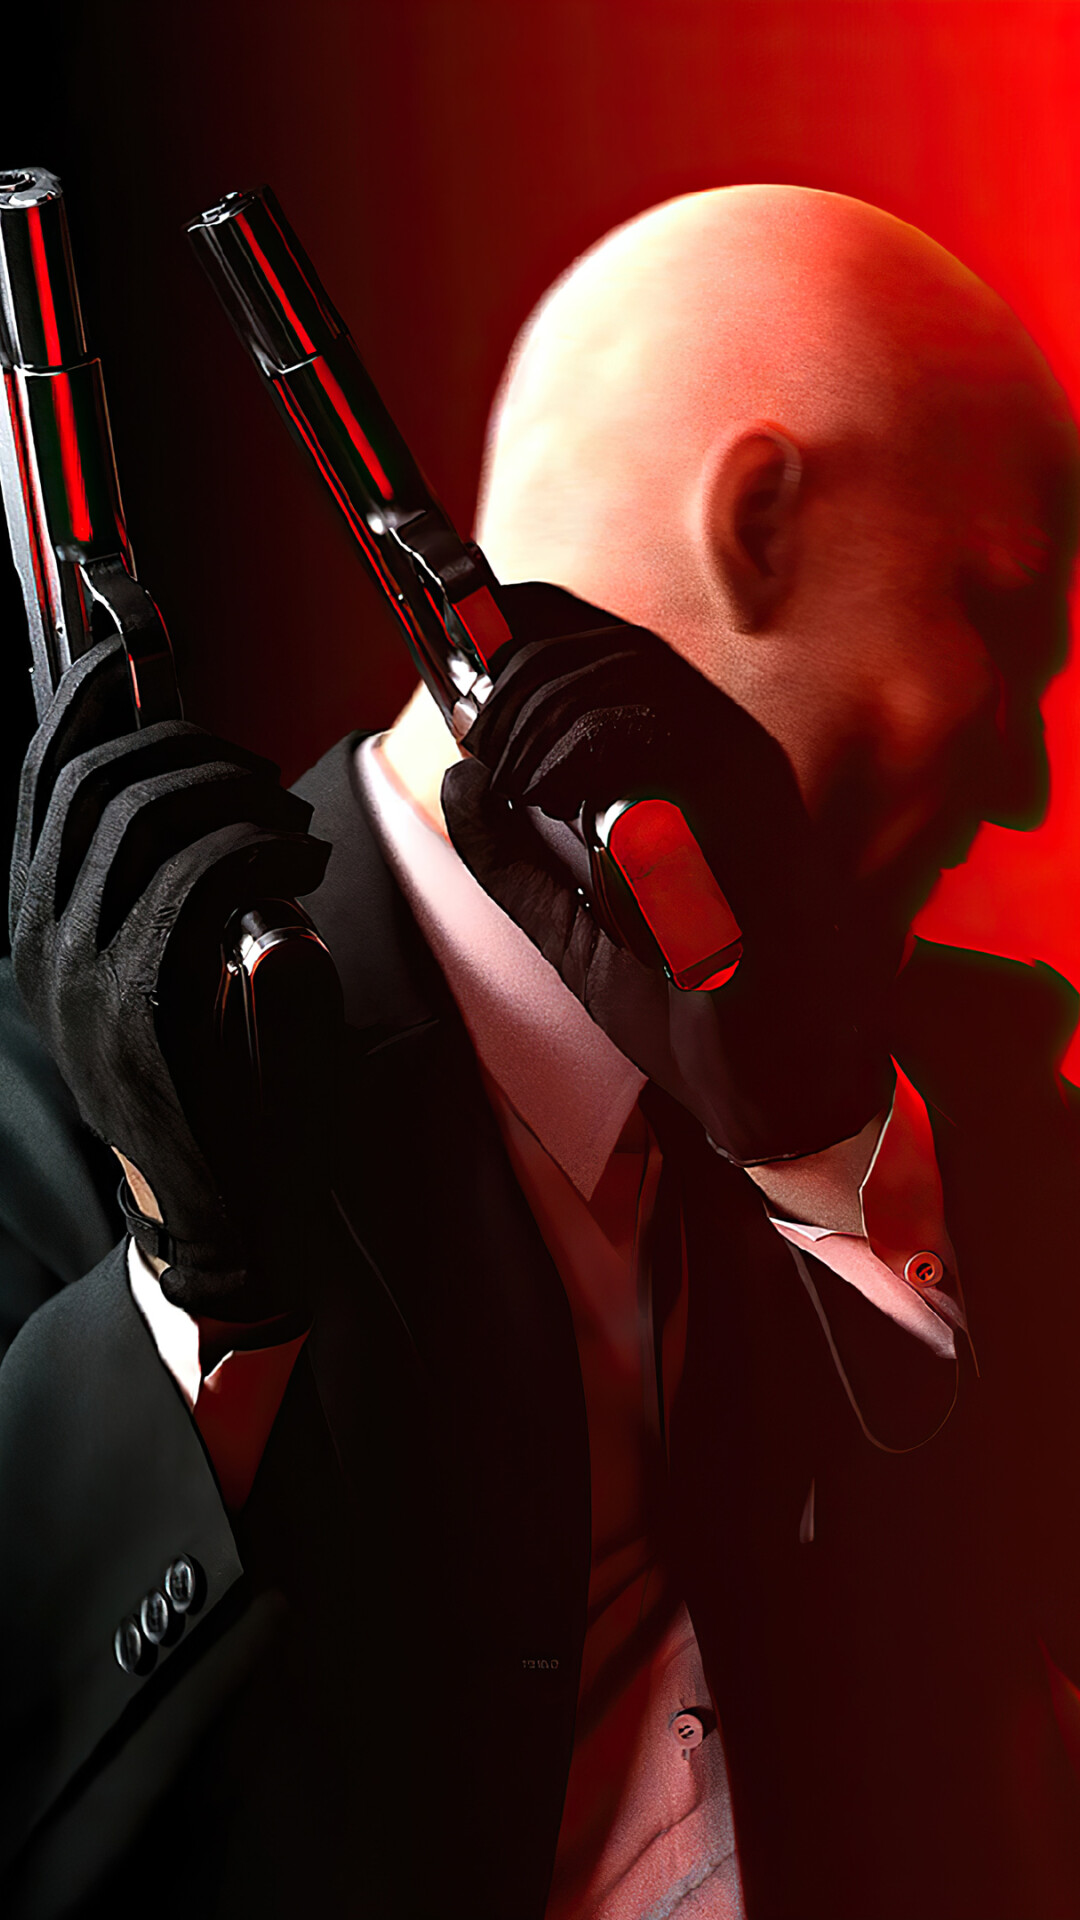 Hitman (Game): Known as 47, Featured in all games of the series, as well as various spin-off media, including two theatrically released films. 1080x1920 Full HD Background.